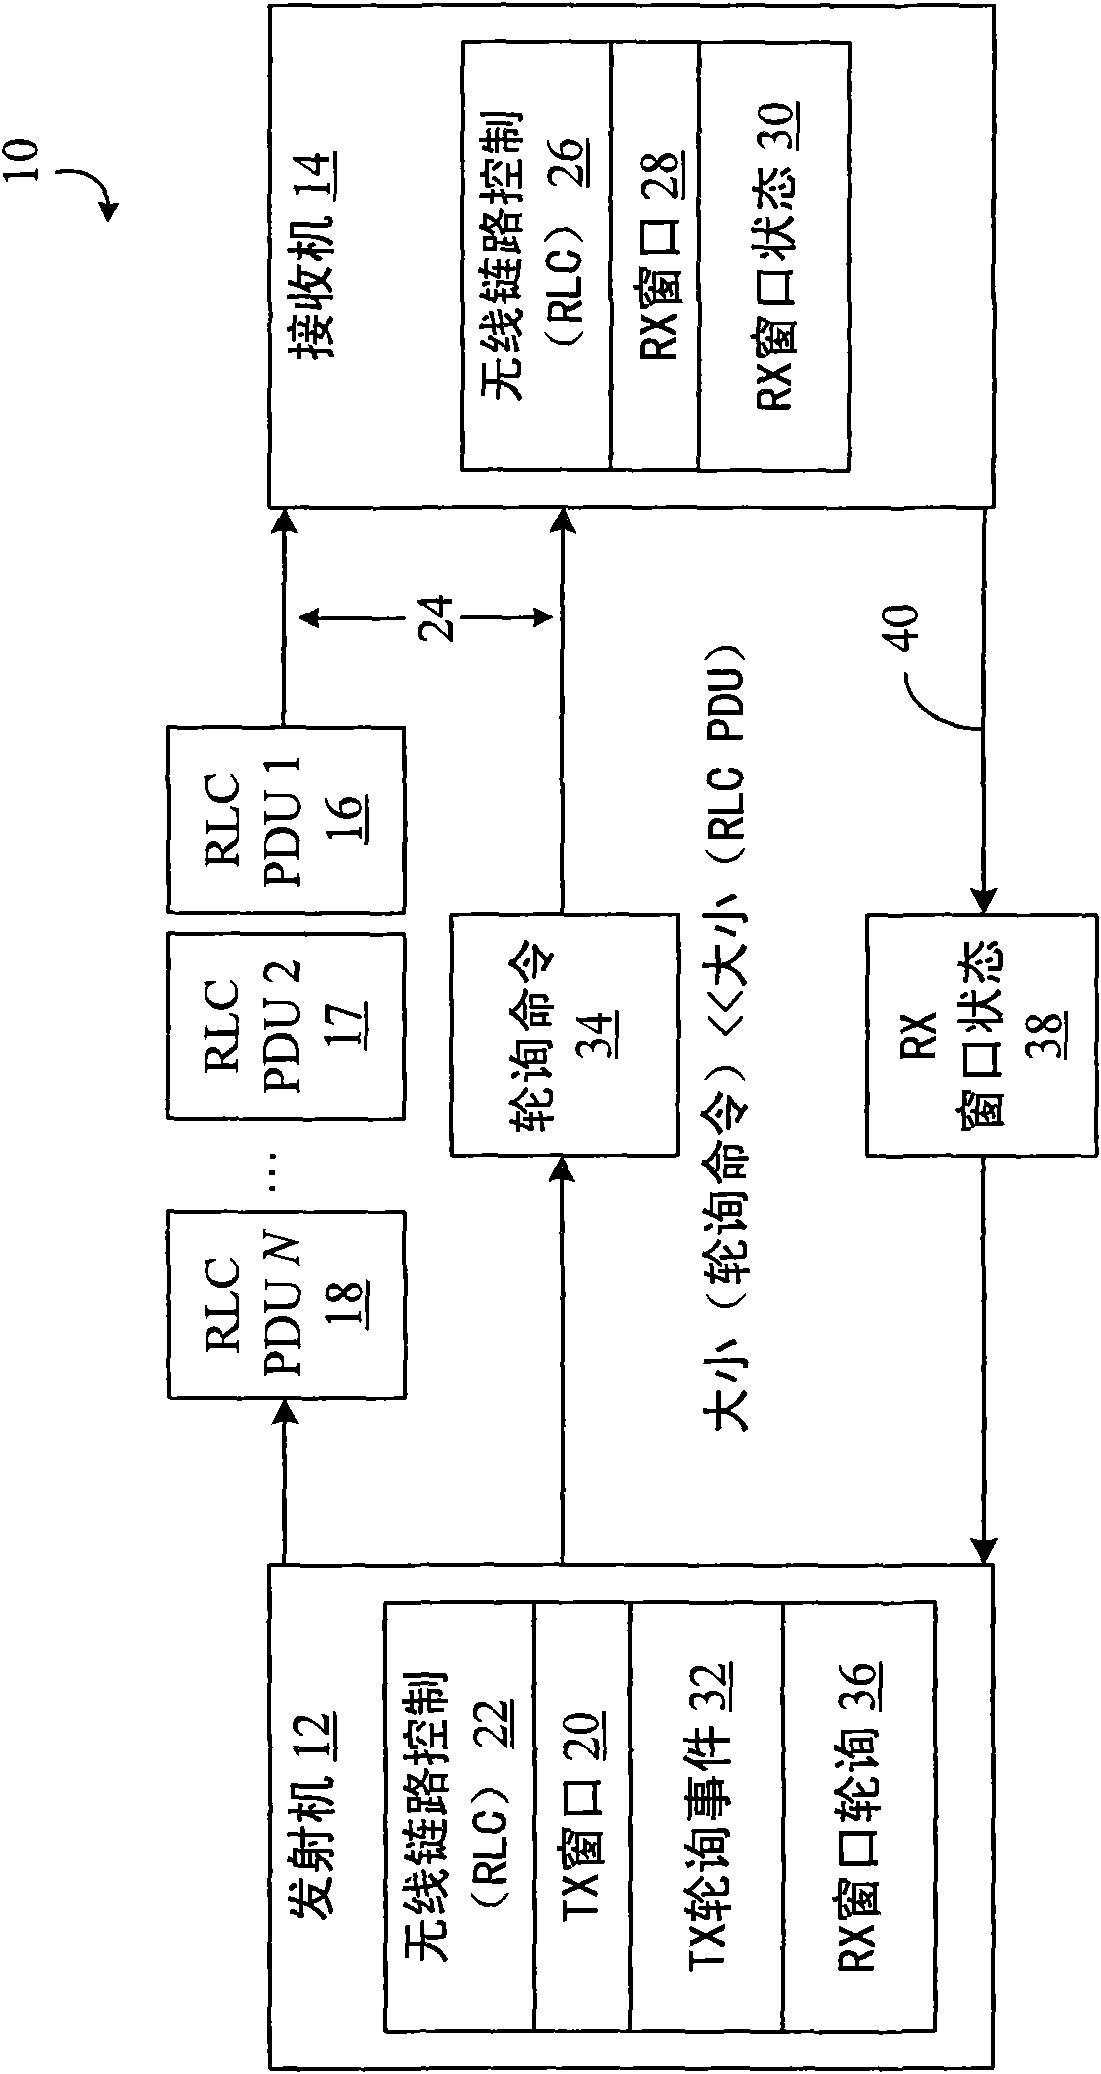 Method and apparatus for polling in a wireless communication system